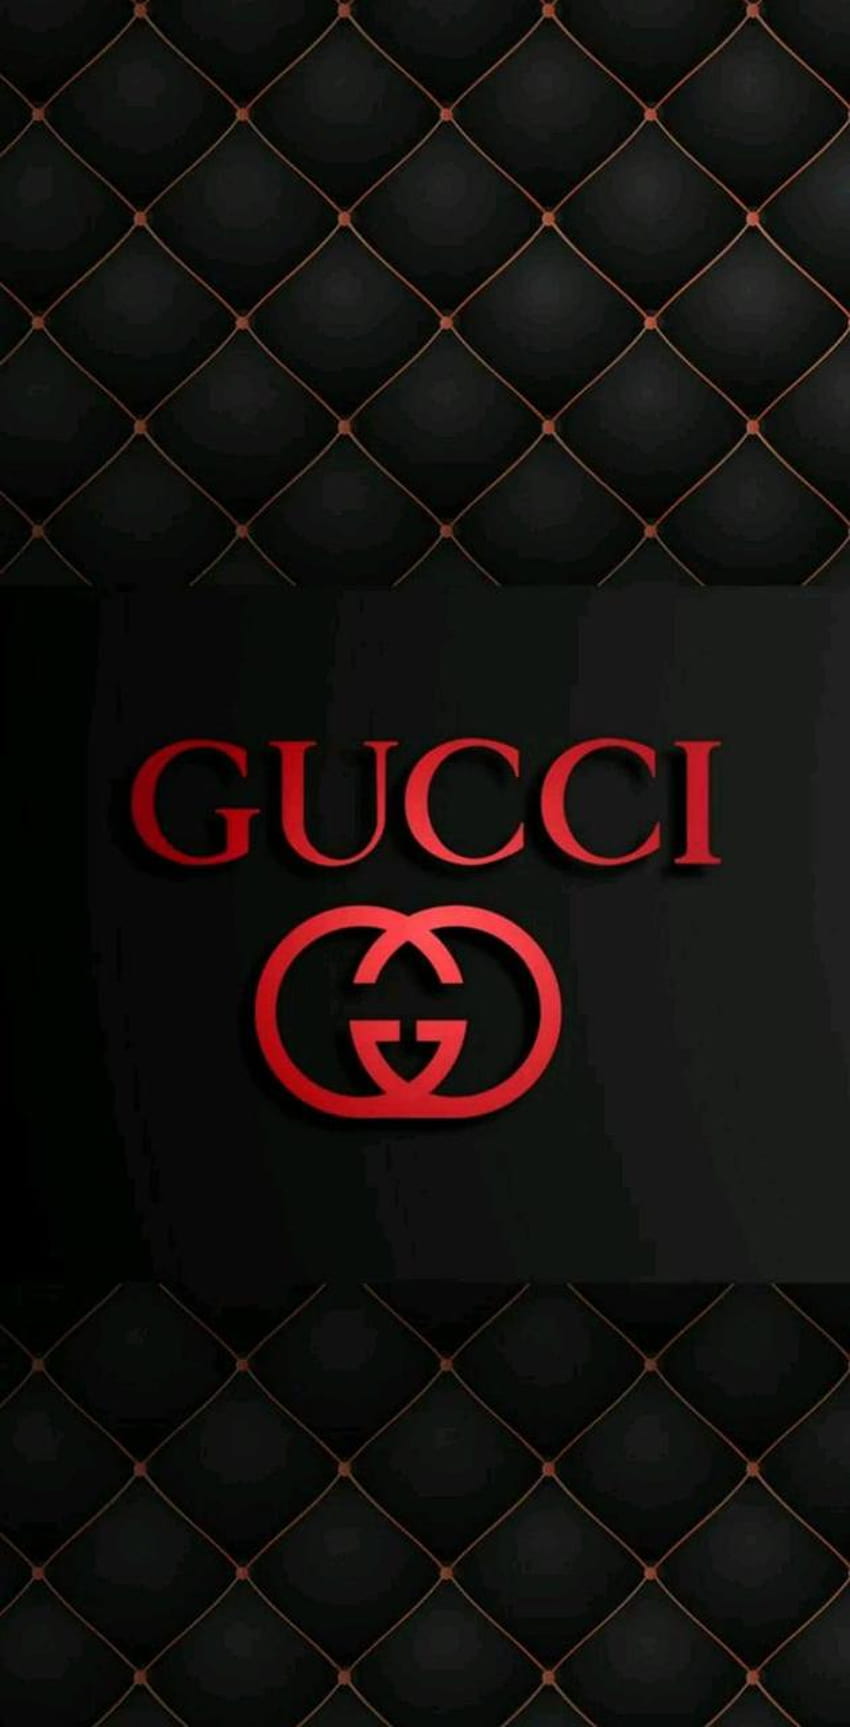 A.J.Sweeney on Gucci, gucci and louis vuitton HD phone wallpaper